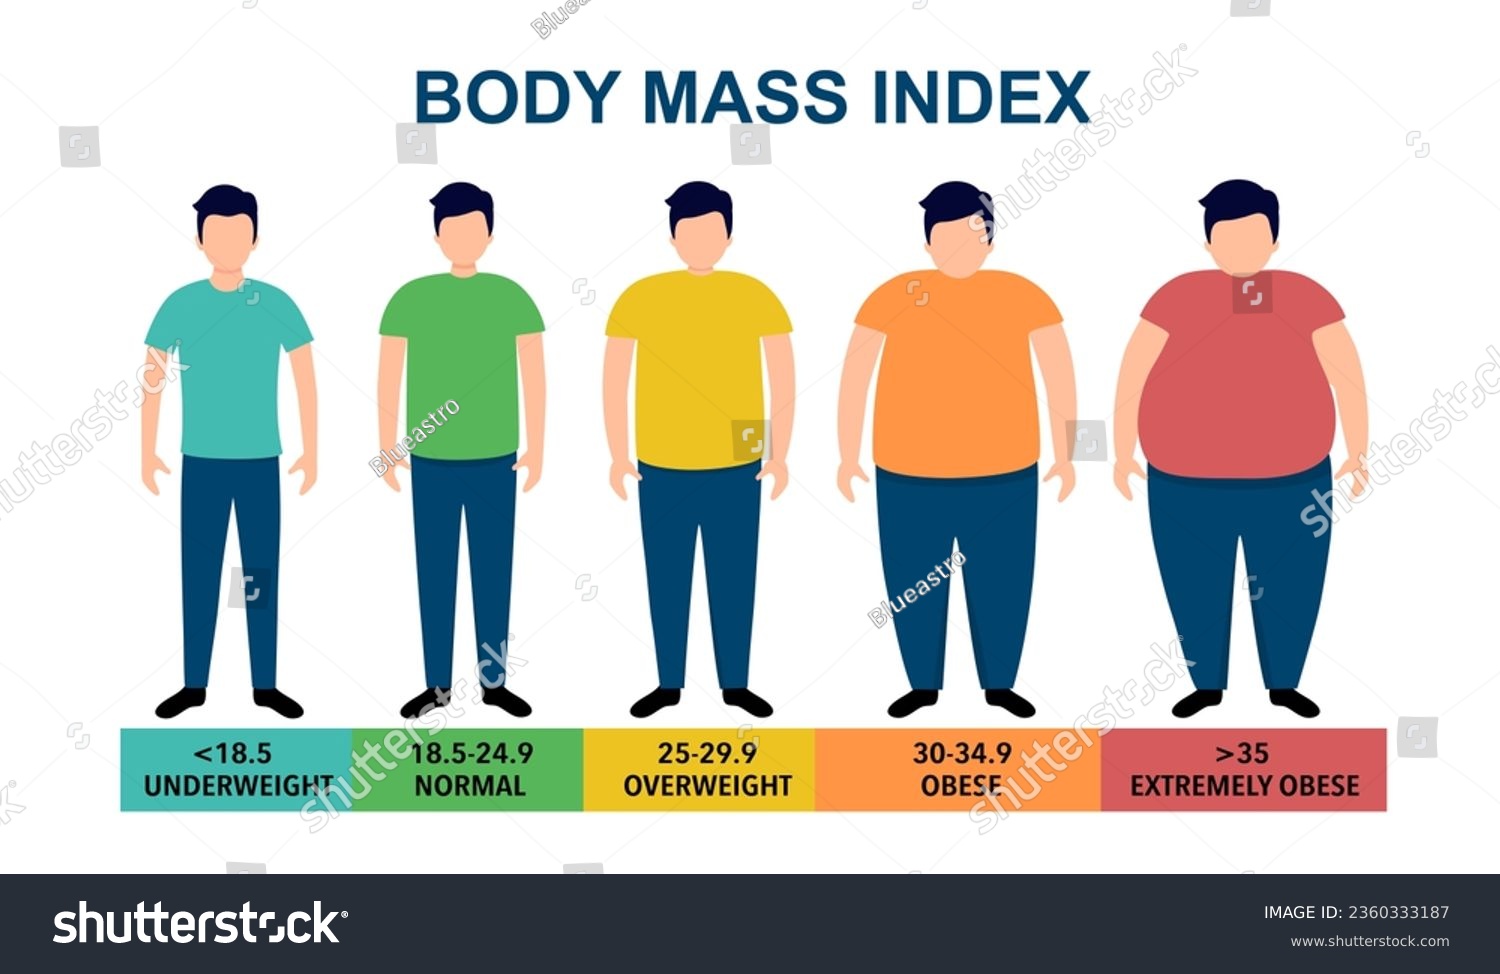 SVG of Body mass index vector illustration from underweight to extremely obese. Man with different obesity degrees. Male body with different weight. svg